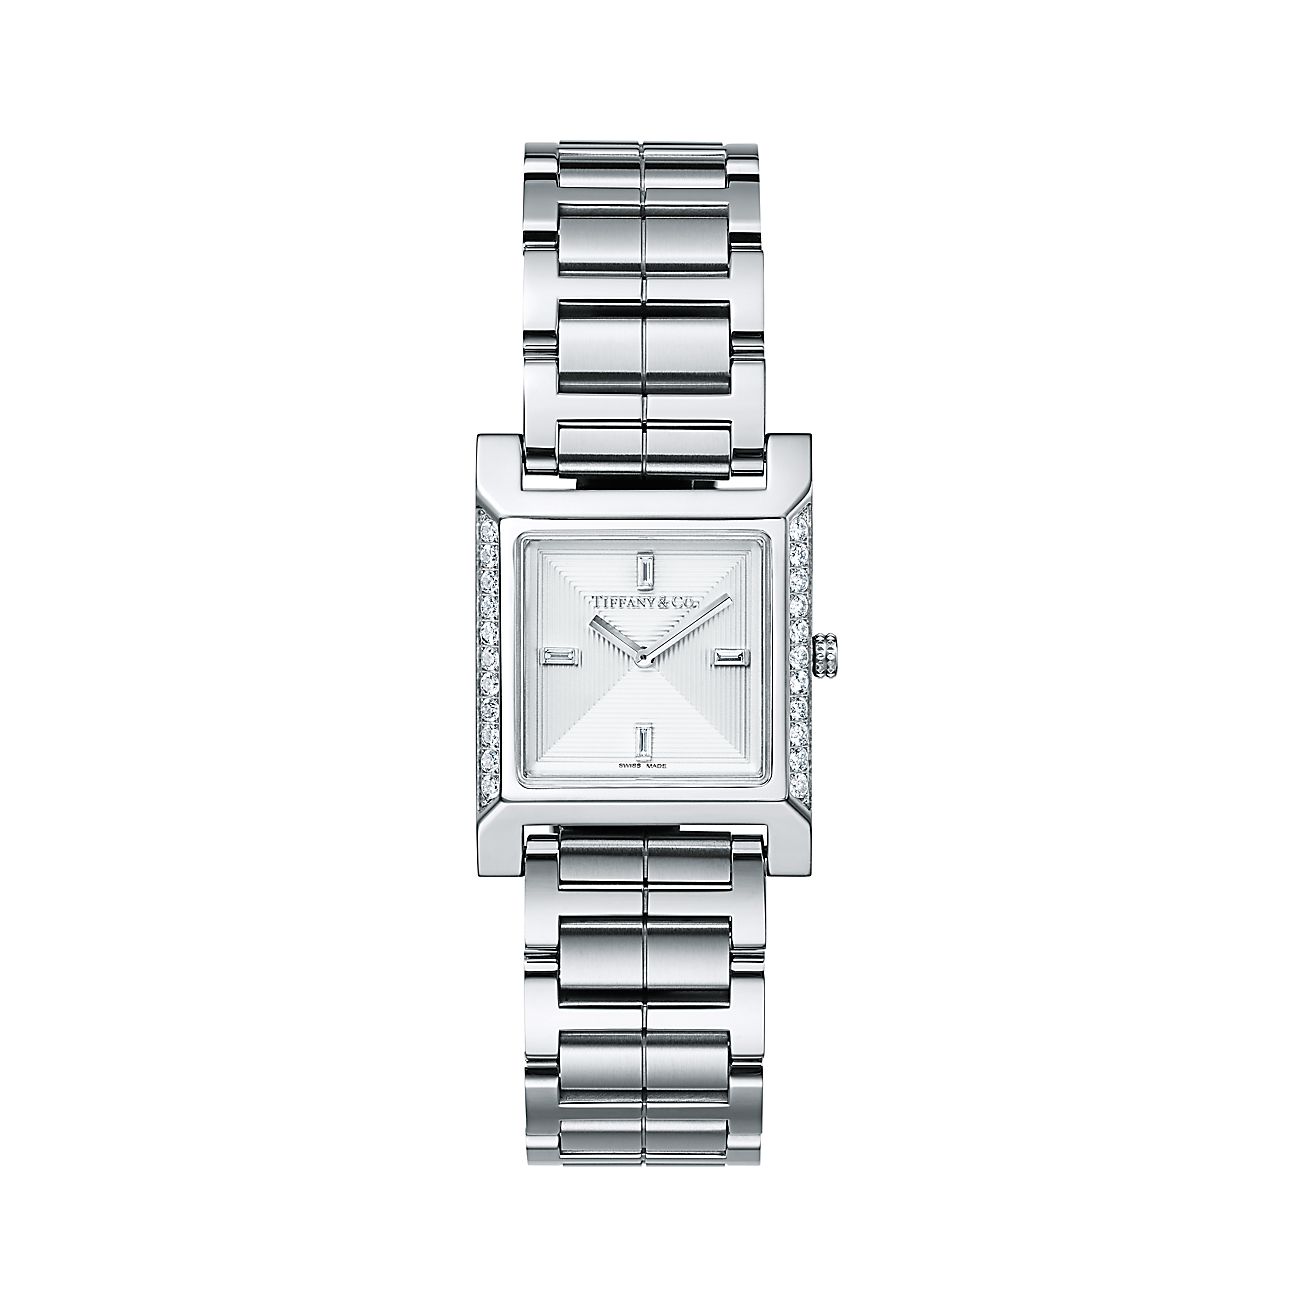 Tiffany 1837 Makers 22 mm square watch in stainless steel with diamonds.